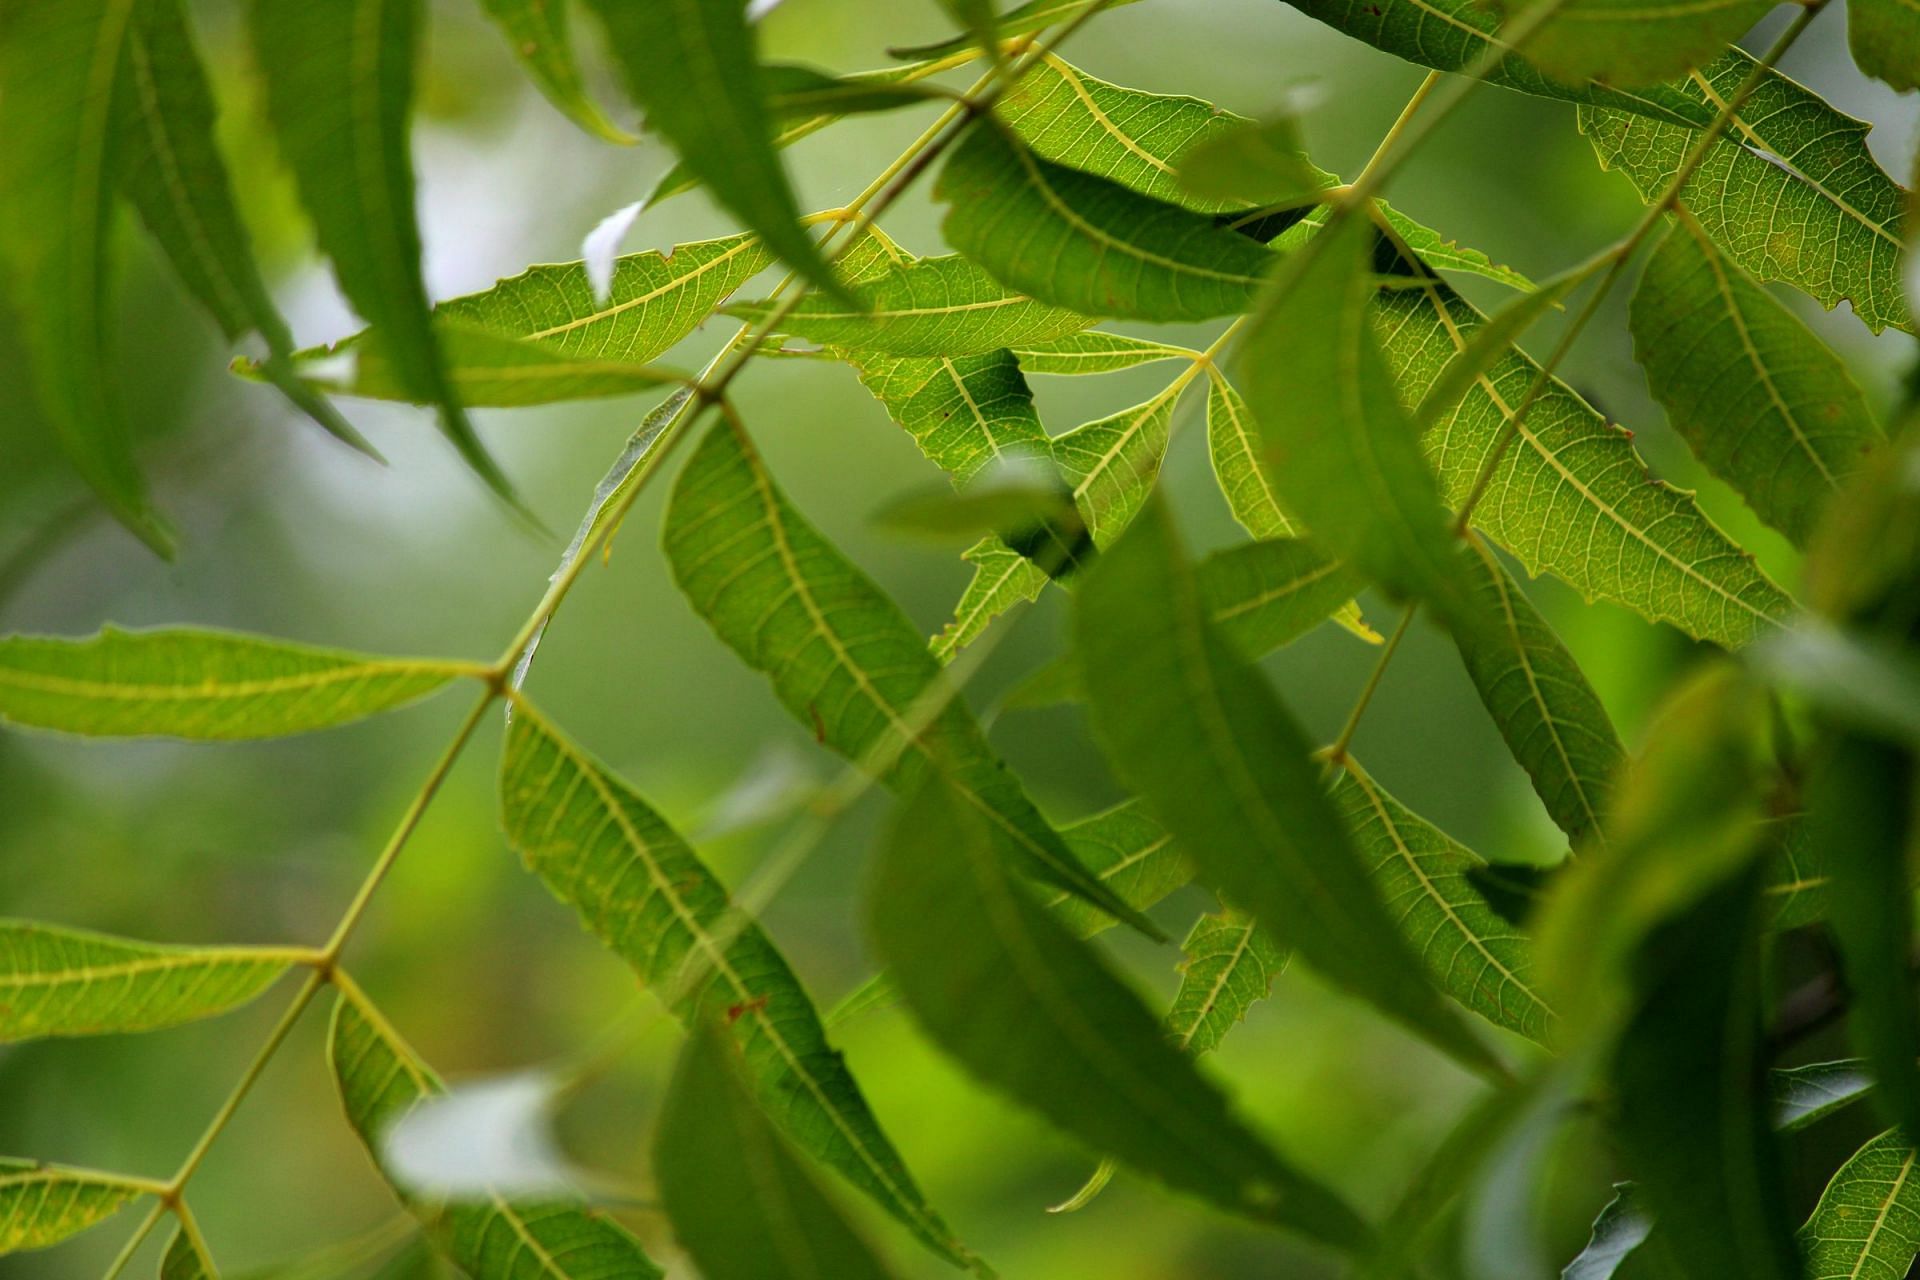 Neem is a common plant in Indian subcontinent and is being used since ancient time to cure ailments (Image by Vijayakumar Bingi on Vecteezy)